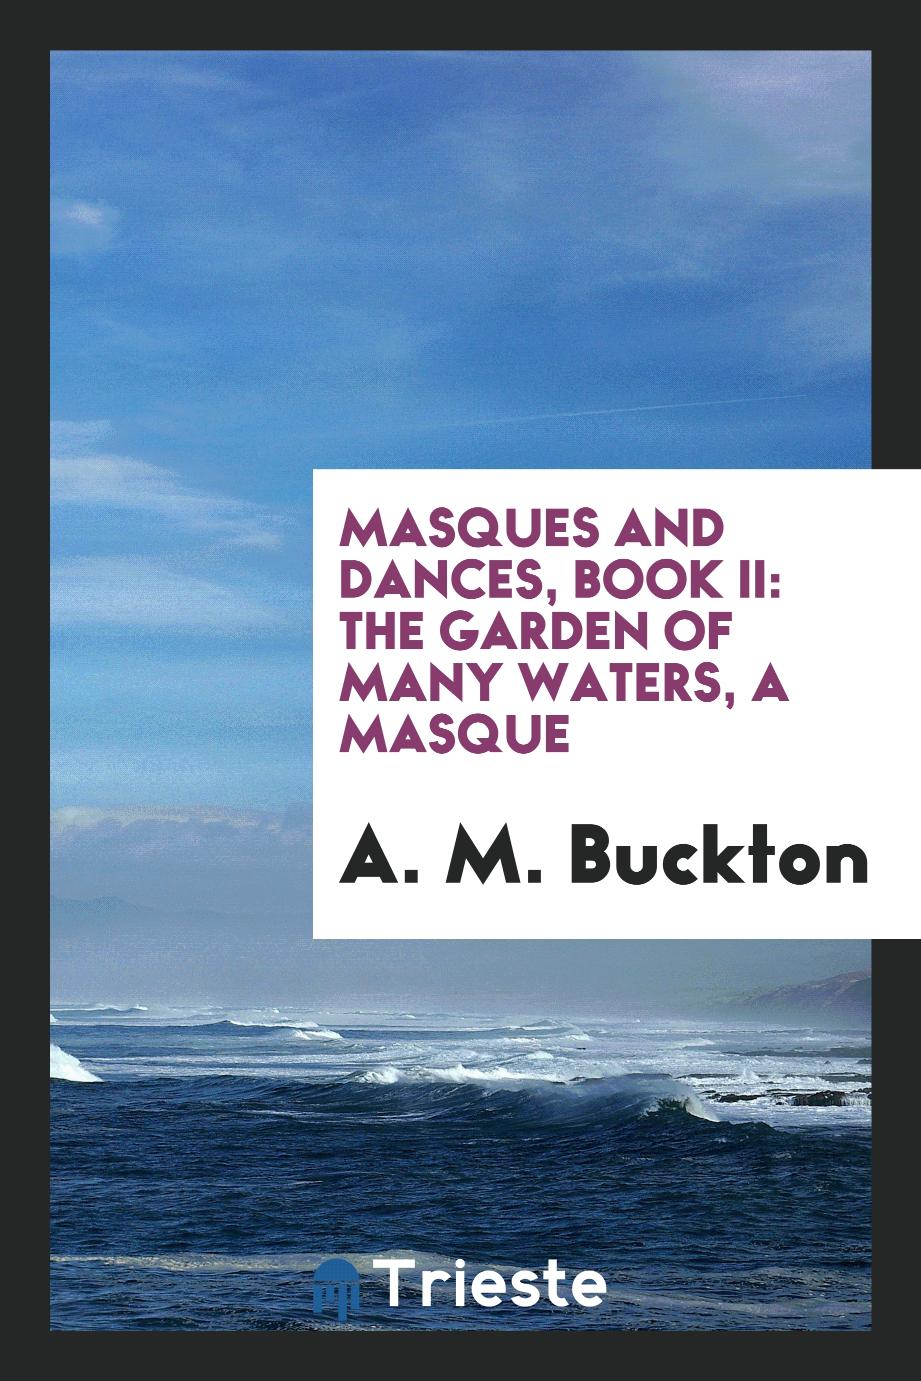 Masques and dances, Book II: The Garden of many waters, a masque